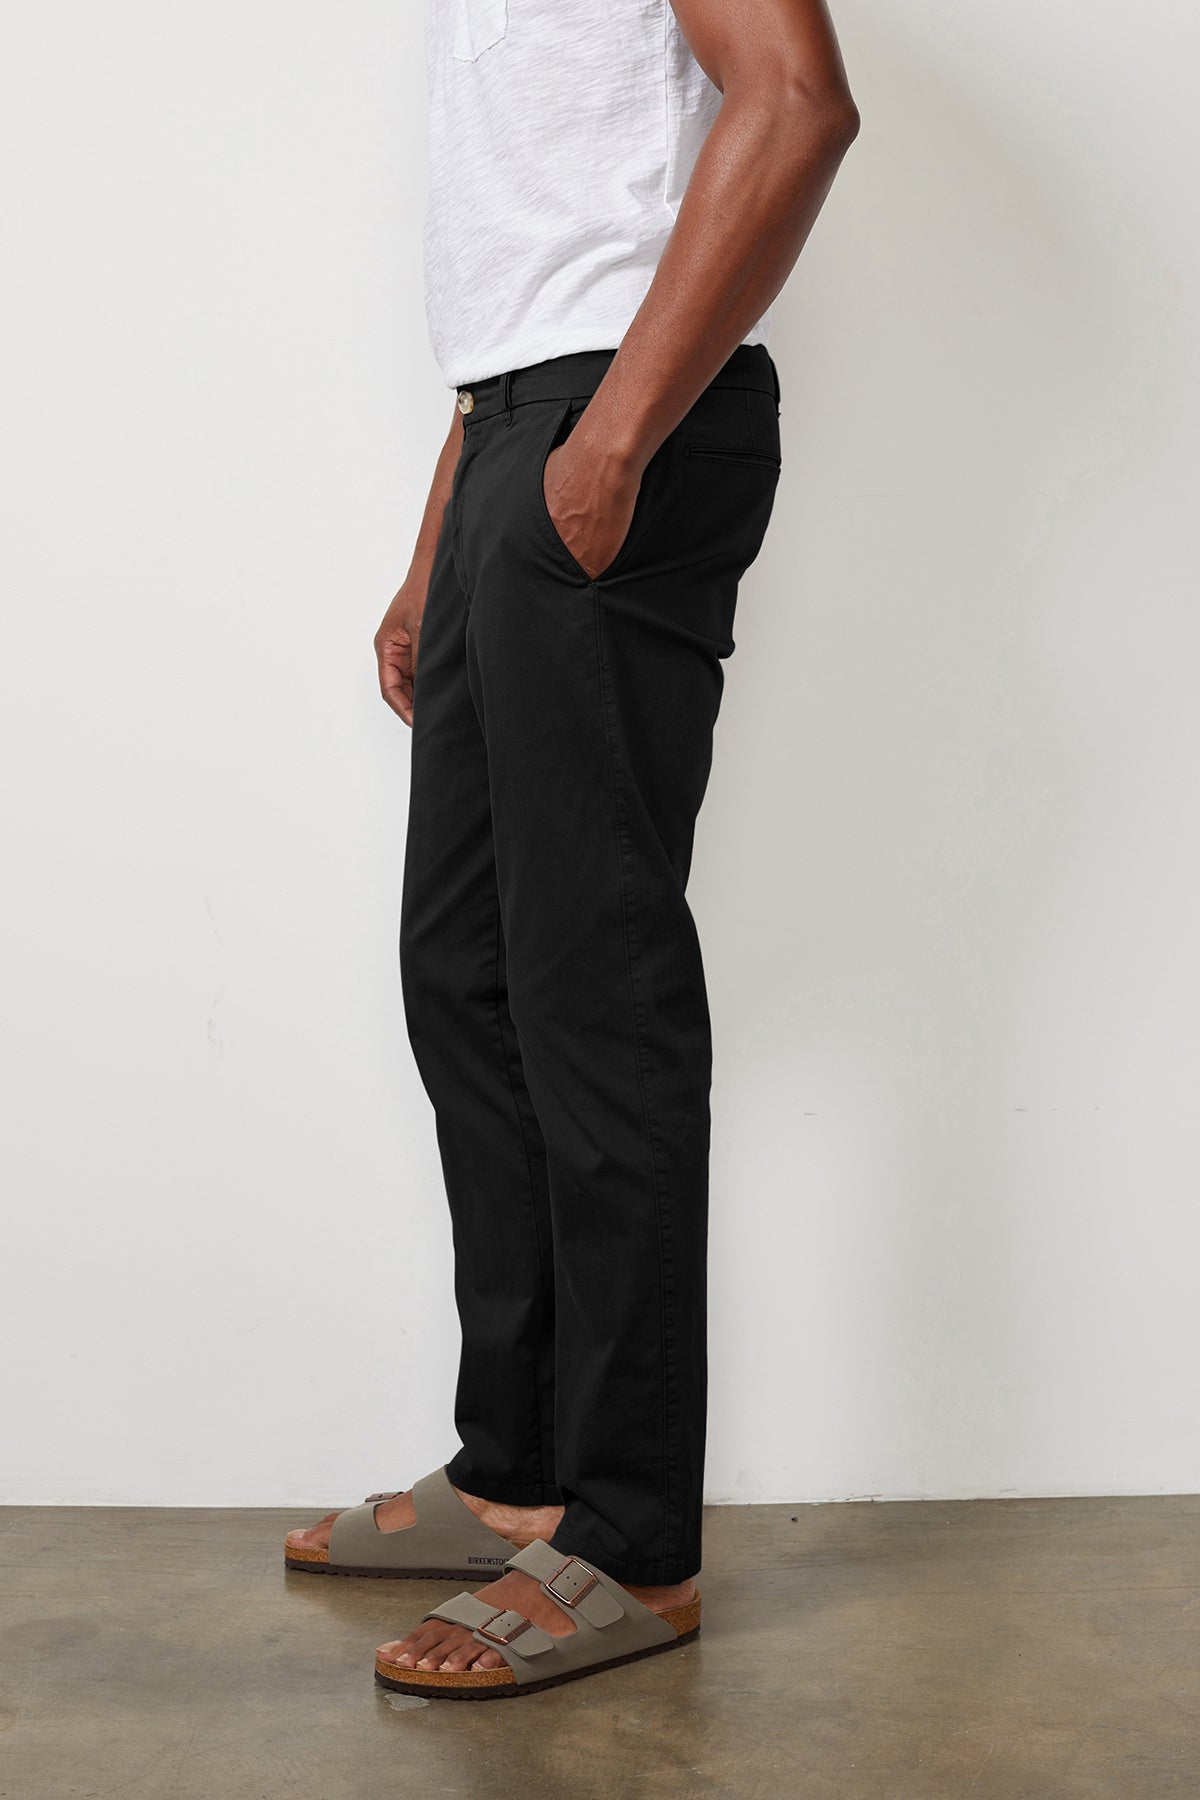 A man wearing a white t-shirt and Velvet by Graham & Spencer BROGAN COTTON TWILL PANT made of cotton twill.-7950531657809